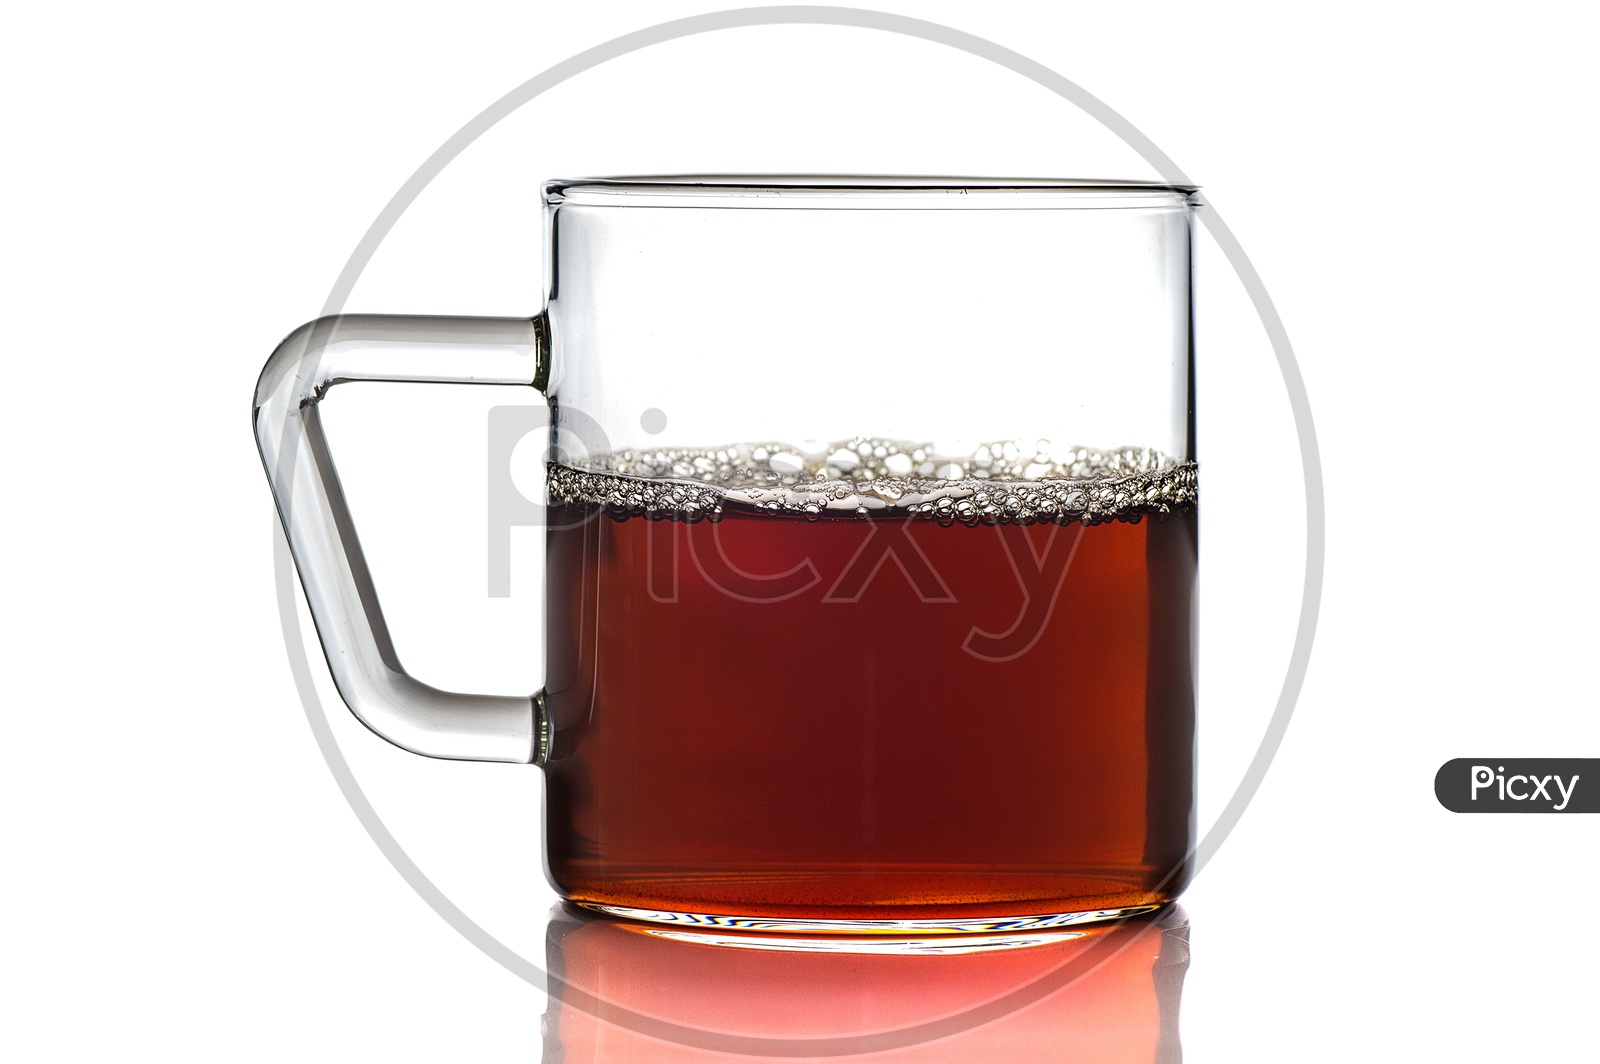 Cup of tea on white background